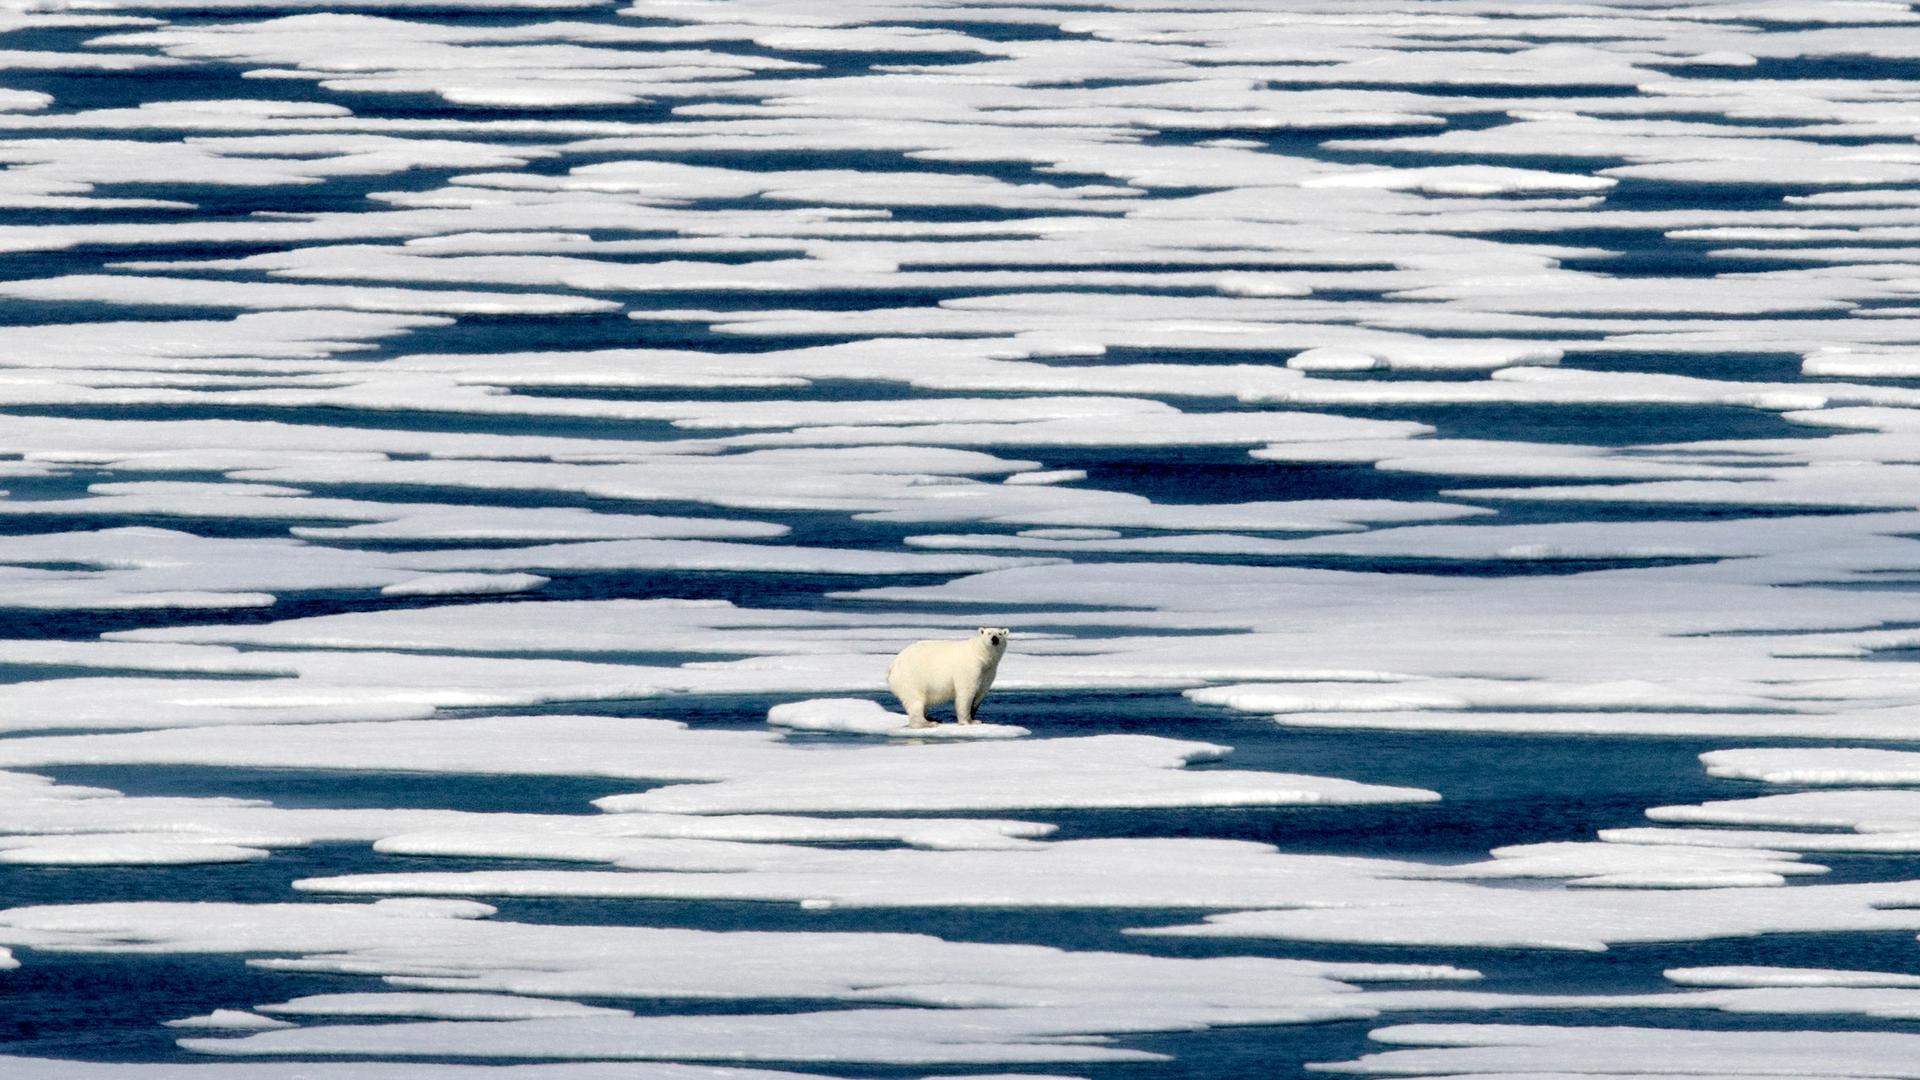 A polar bear is shown in the distance standing on a piece of ice among a large grouping of flat floating ice pieces.